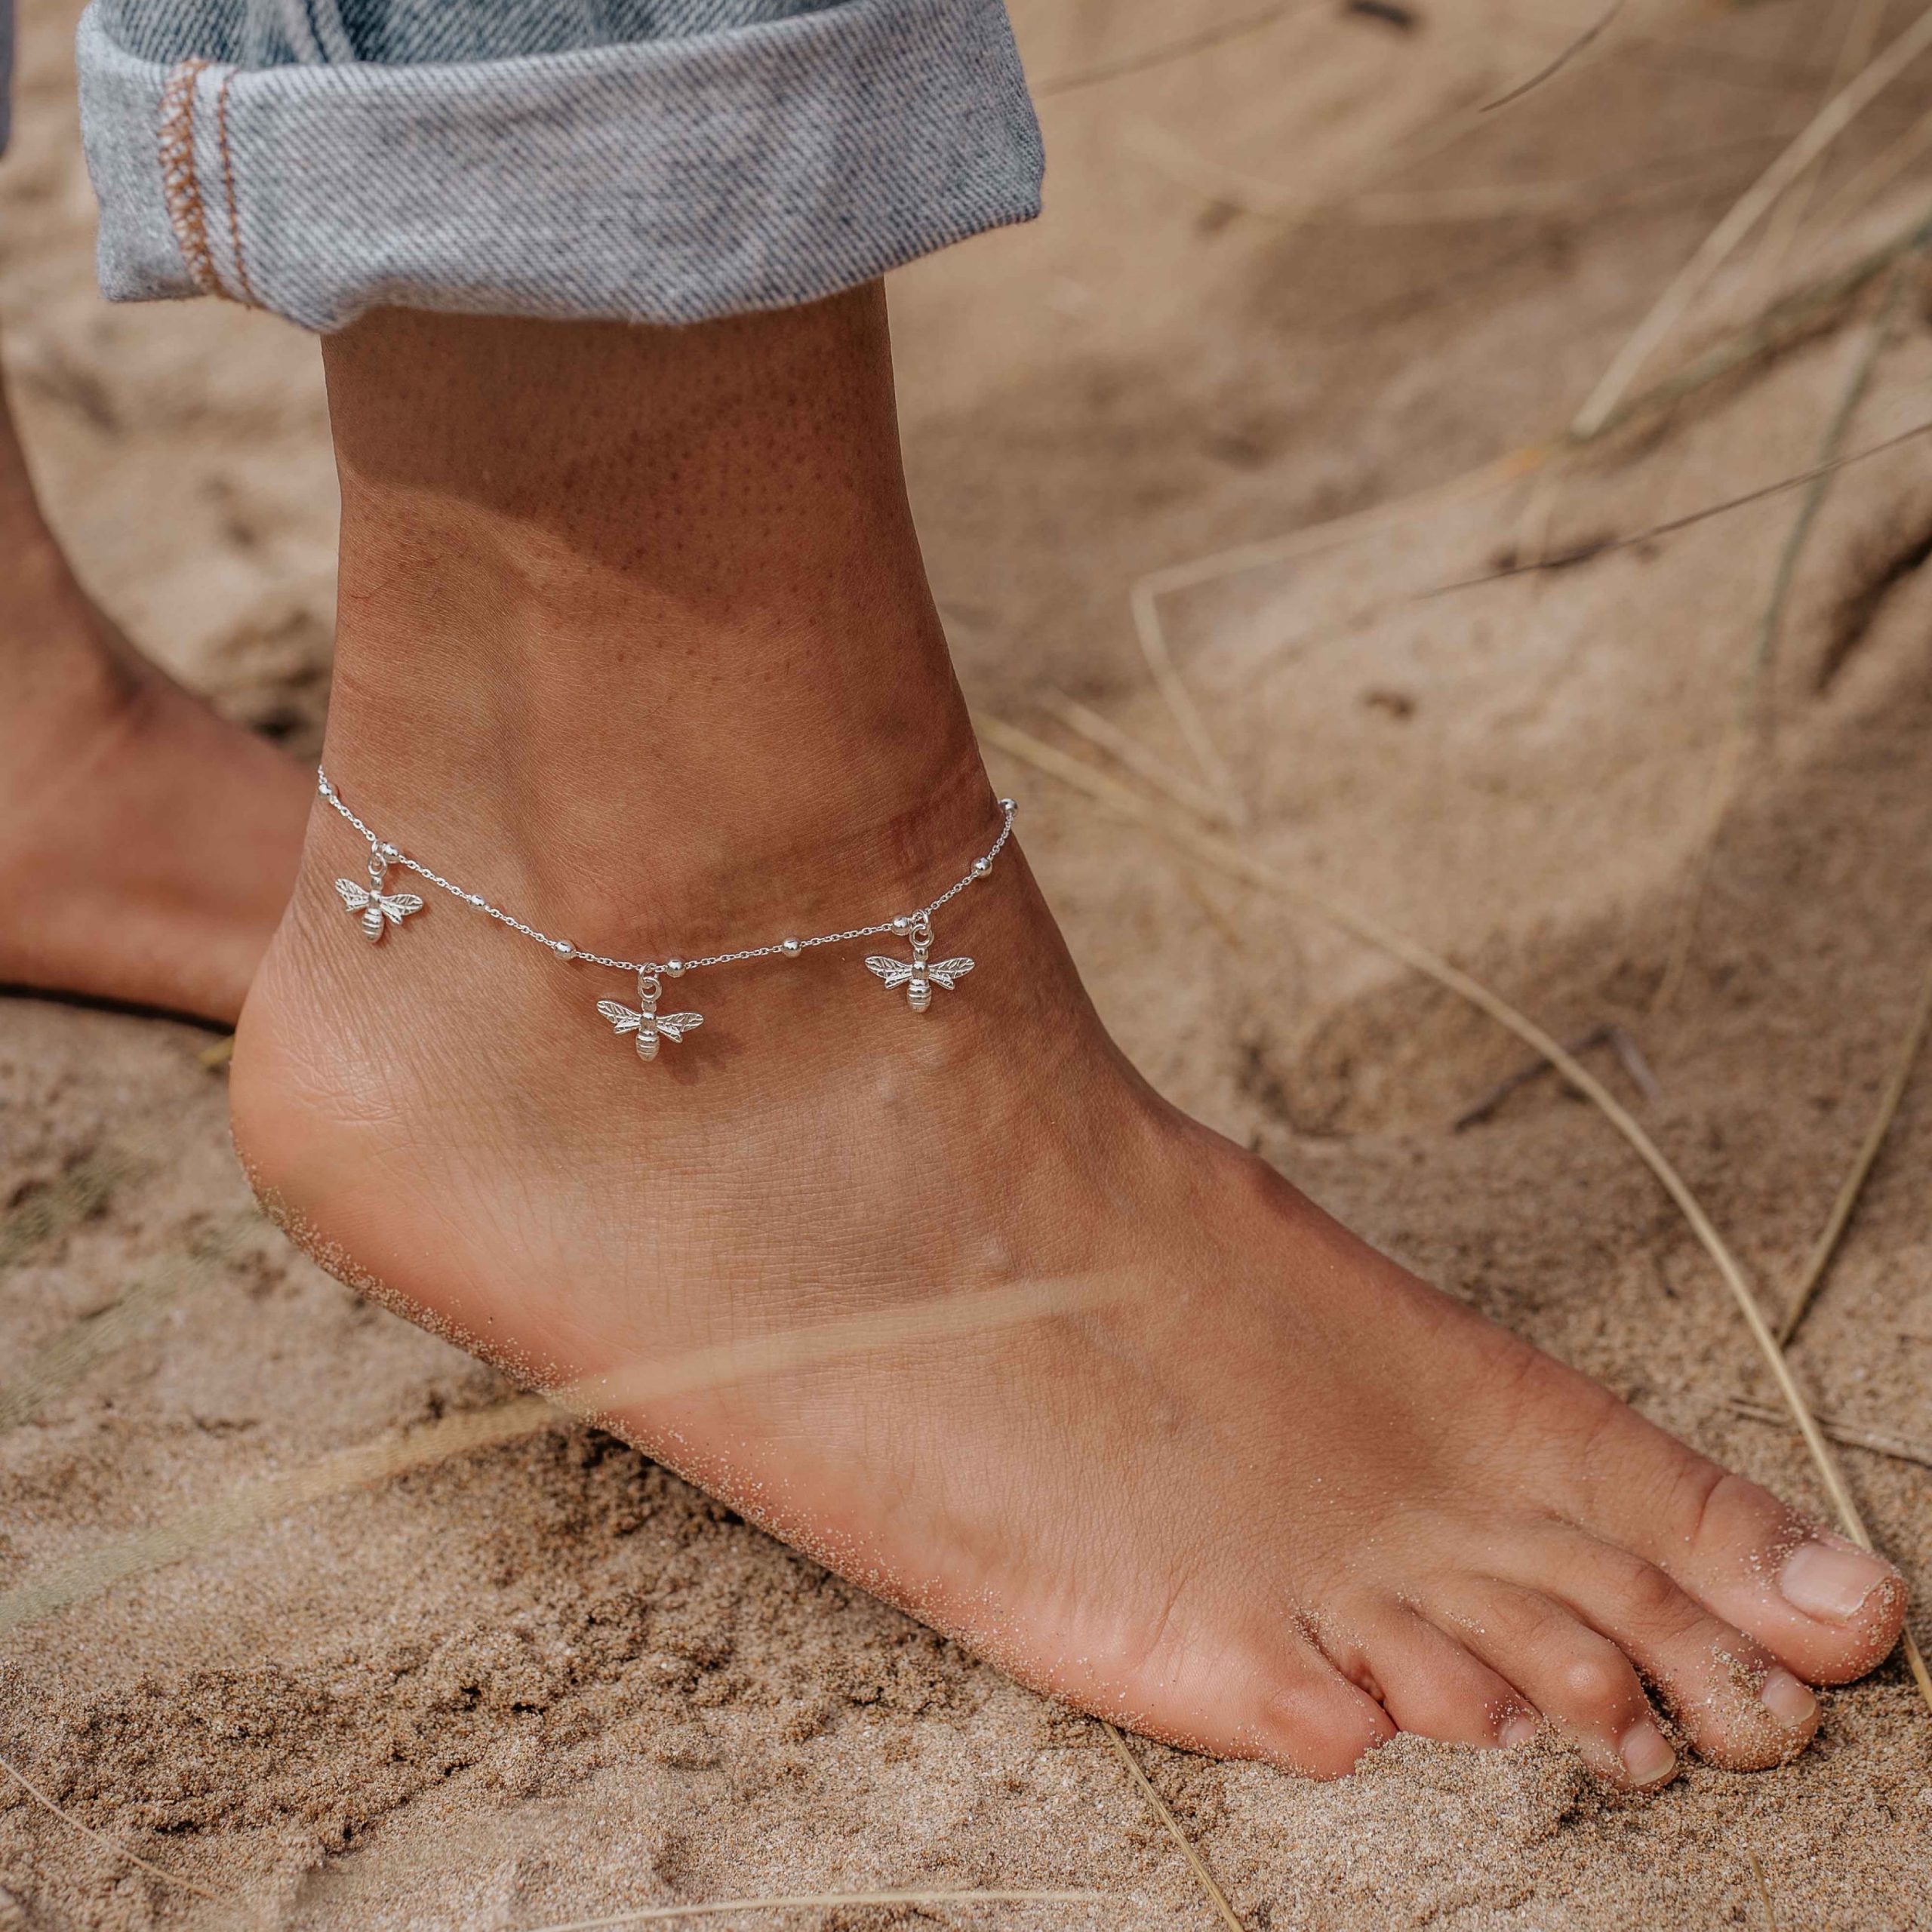 The Anklets To Wear This Summer